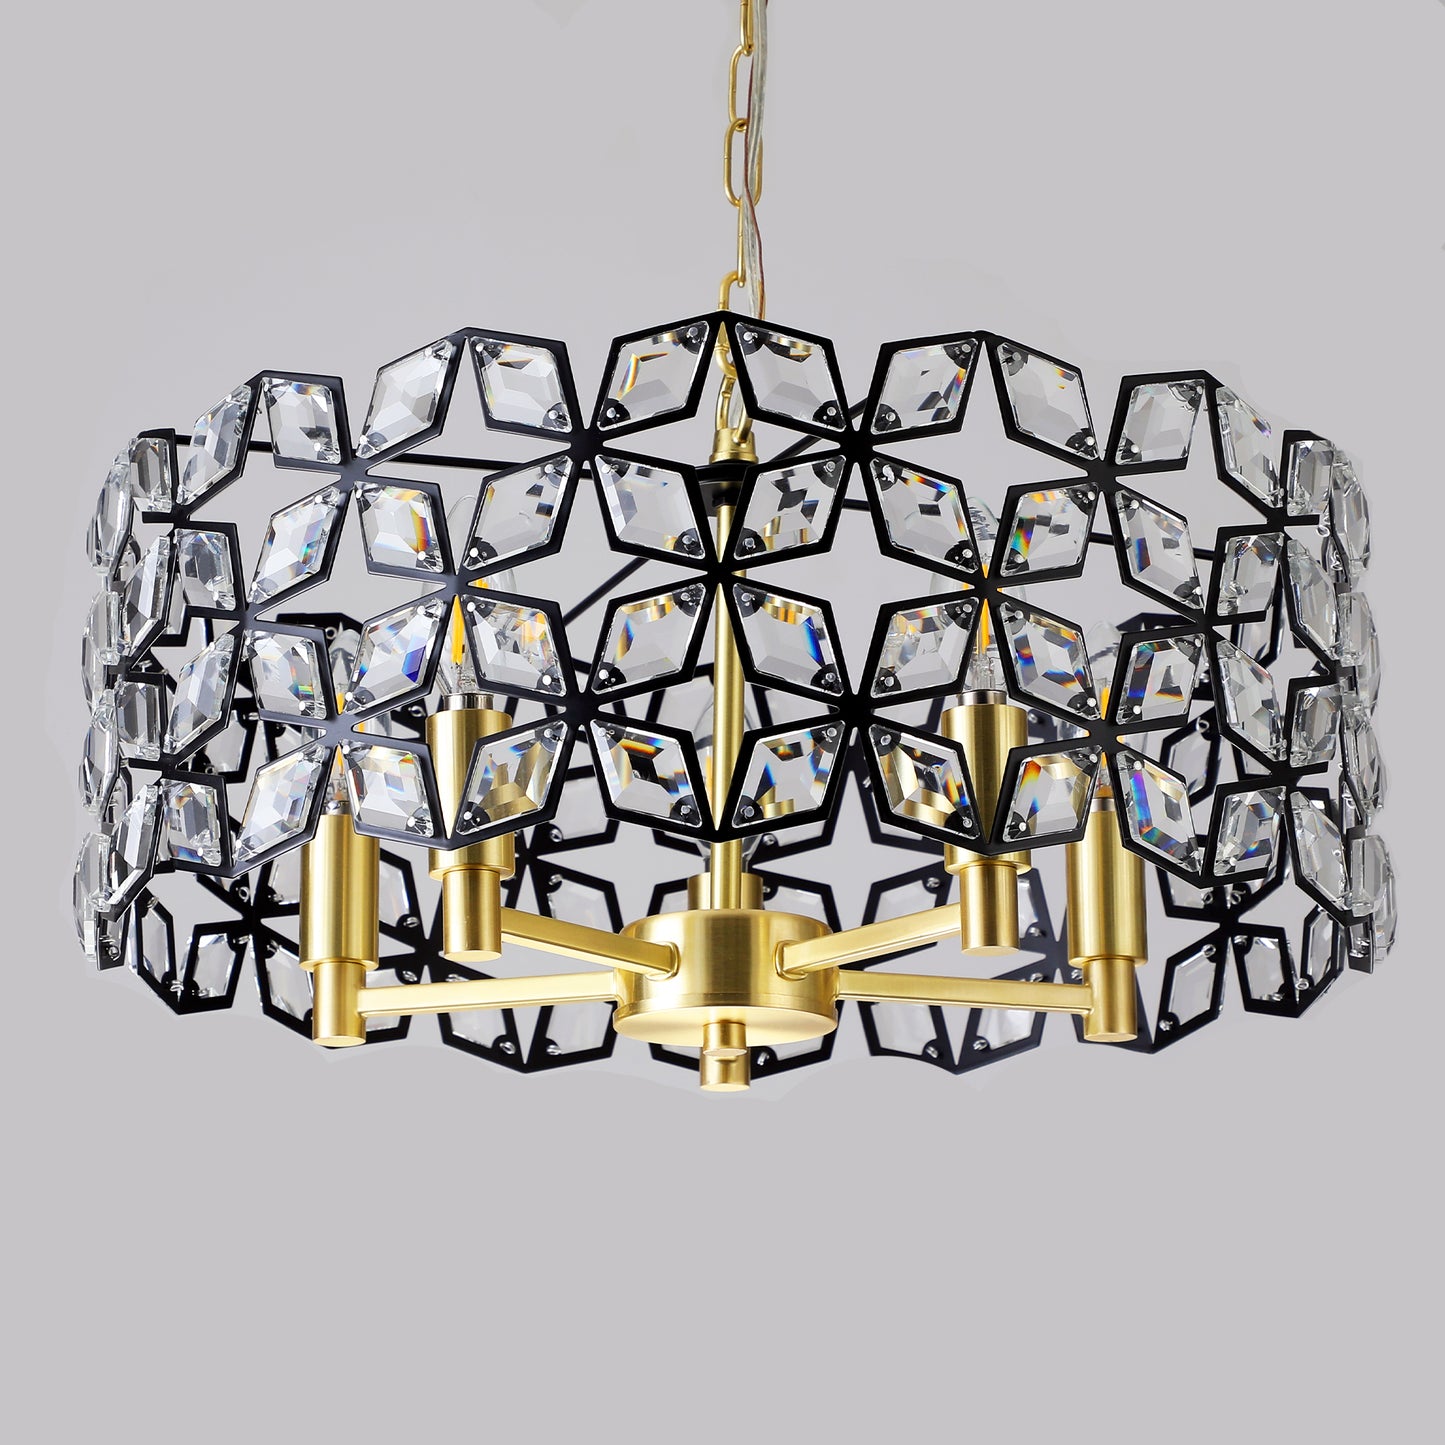 Modern Crystal Chandelier for Living-Room Round Cristal Lamp Luxury Home Decor  Light Fixture